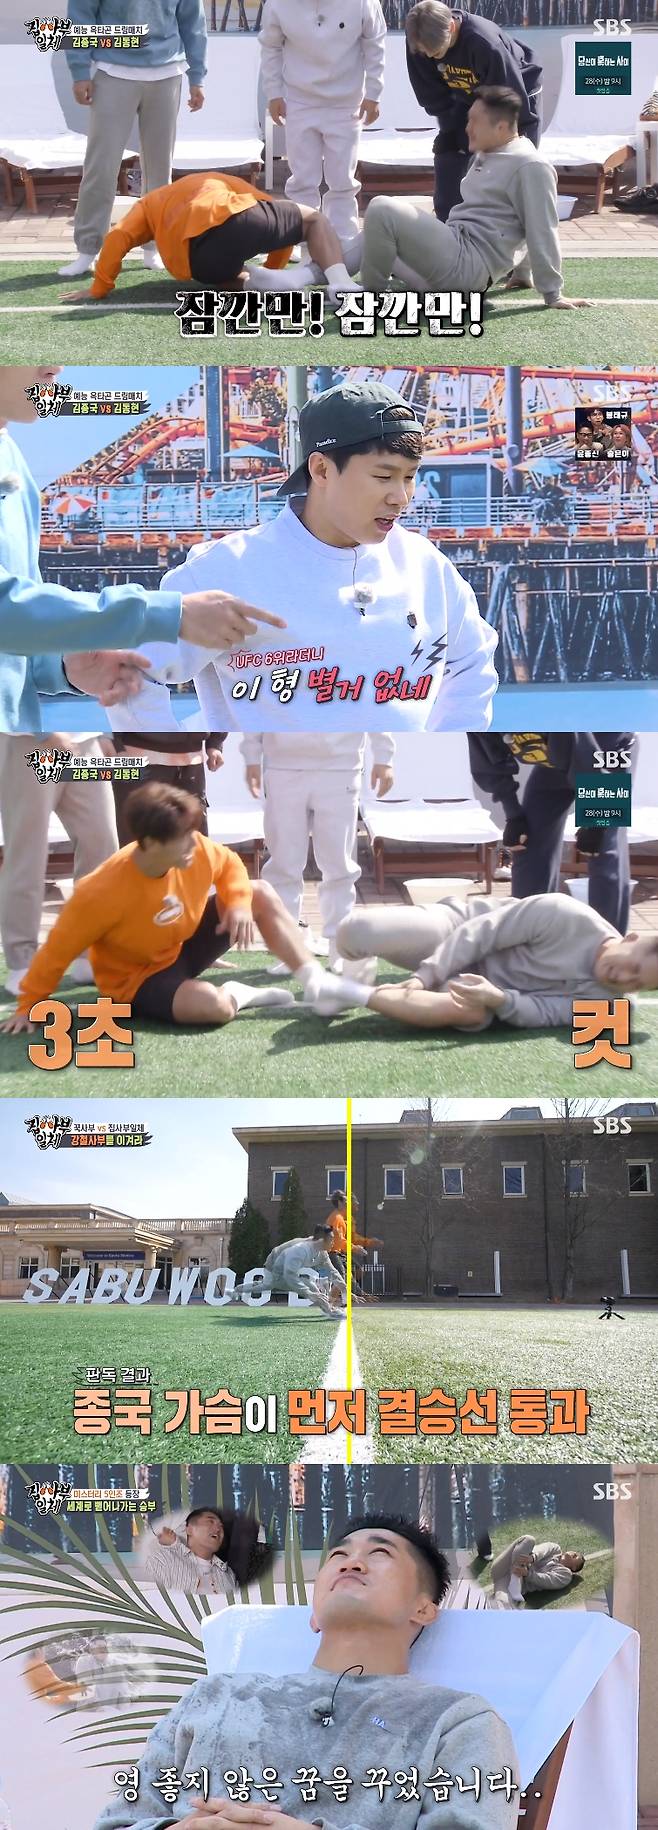 All The Butlers mixed martial arts player Kim Dong-Hyun tasted the losing streak in Battle with singer Kim Jong-kook.Kim Jong-kook was the master of the SBS entertainment program All The Butlers broadcast on the 25th.Kim Jong-kook and Kim Dong-Hyun went on the bridge fight Battle; Kim Dong-Hyun, who failed to hold on, eventually declared surrender, shouting Wait a minute!Lee Seung-gi said, Ill do my fitness.Health is the best, Yang Se-hyeong responded by saying, (Kim Dong-Hyun) brother Legal separation is not there. The two battles led to a run.Kim Dong-Hyun was re-enacted after seeing Cha Eun-woo and Kim Jong-kooks running battle, which was tense with Kim Jong-kook, but he fell ahead of the finish line and increased tension.The result was a victory for Kim Jong-kook, with a half-foot difference from the video reading.Meanwhile, All The Butlers is broadcast every Sunday at 6:25 pm.photoSBS broadcast screen